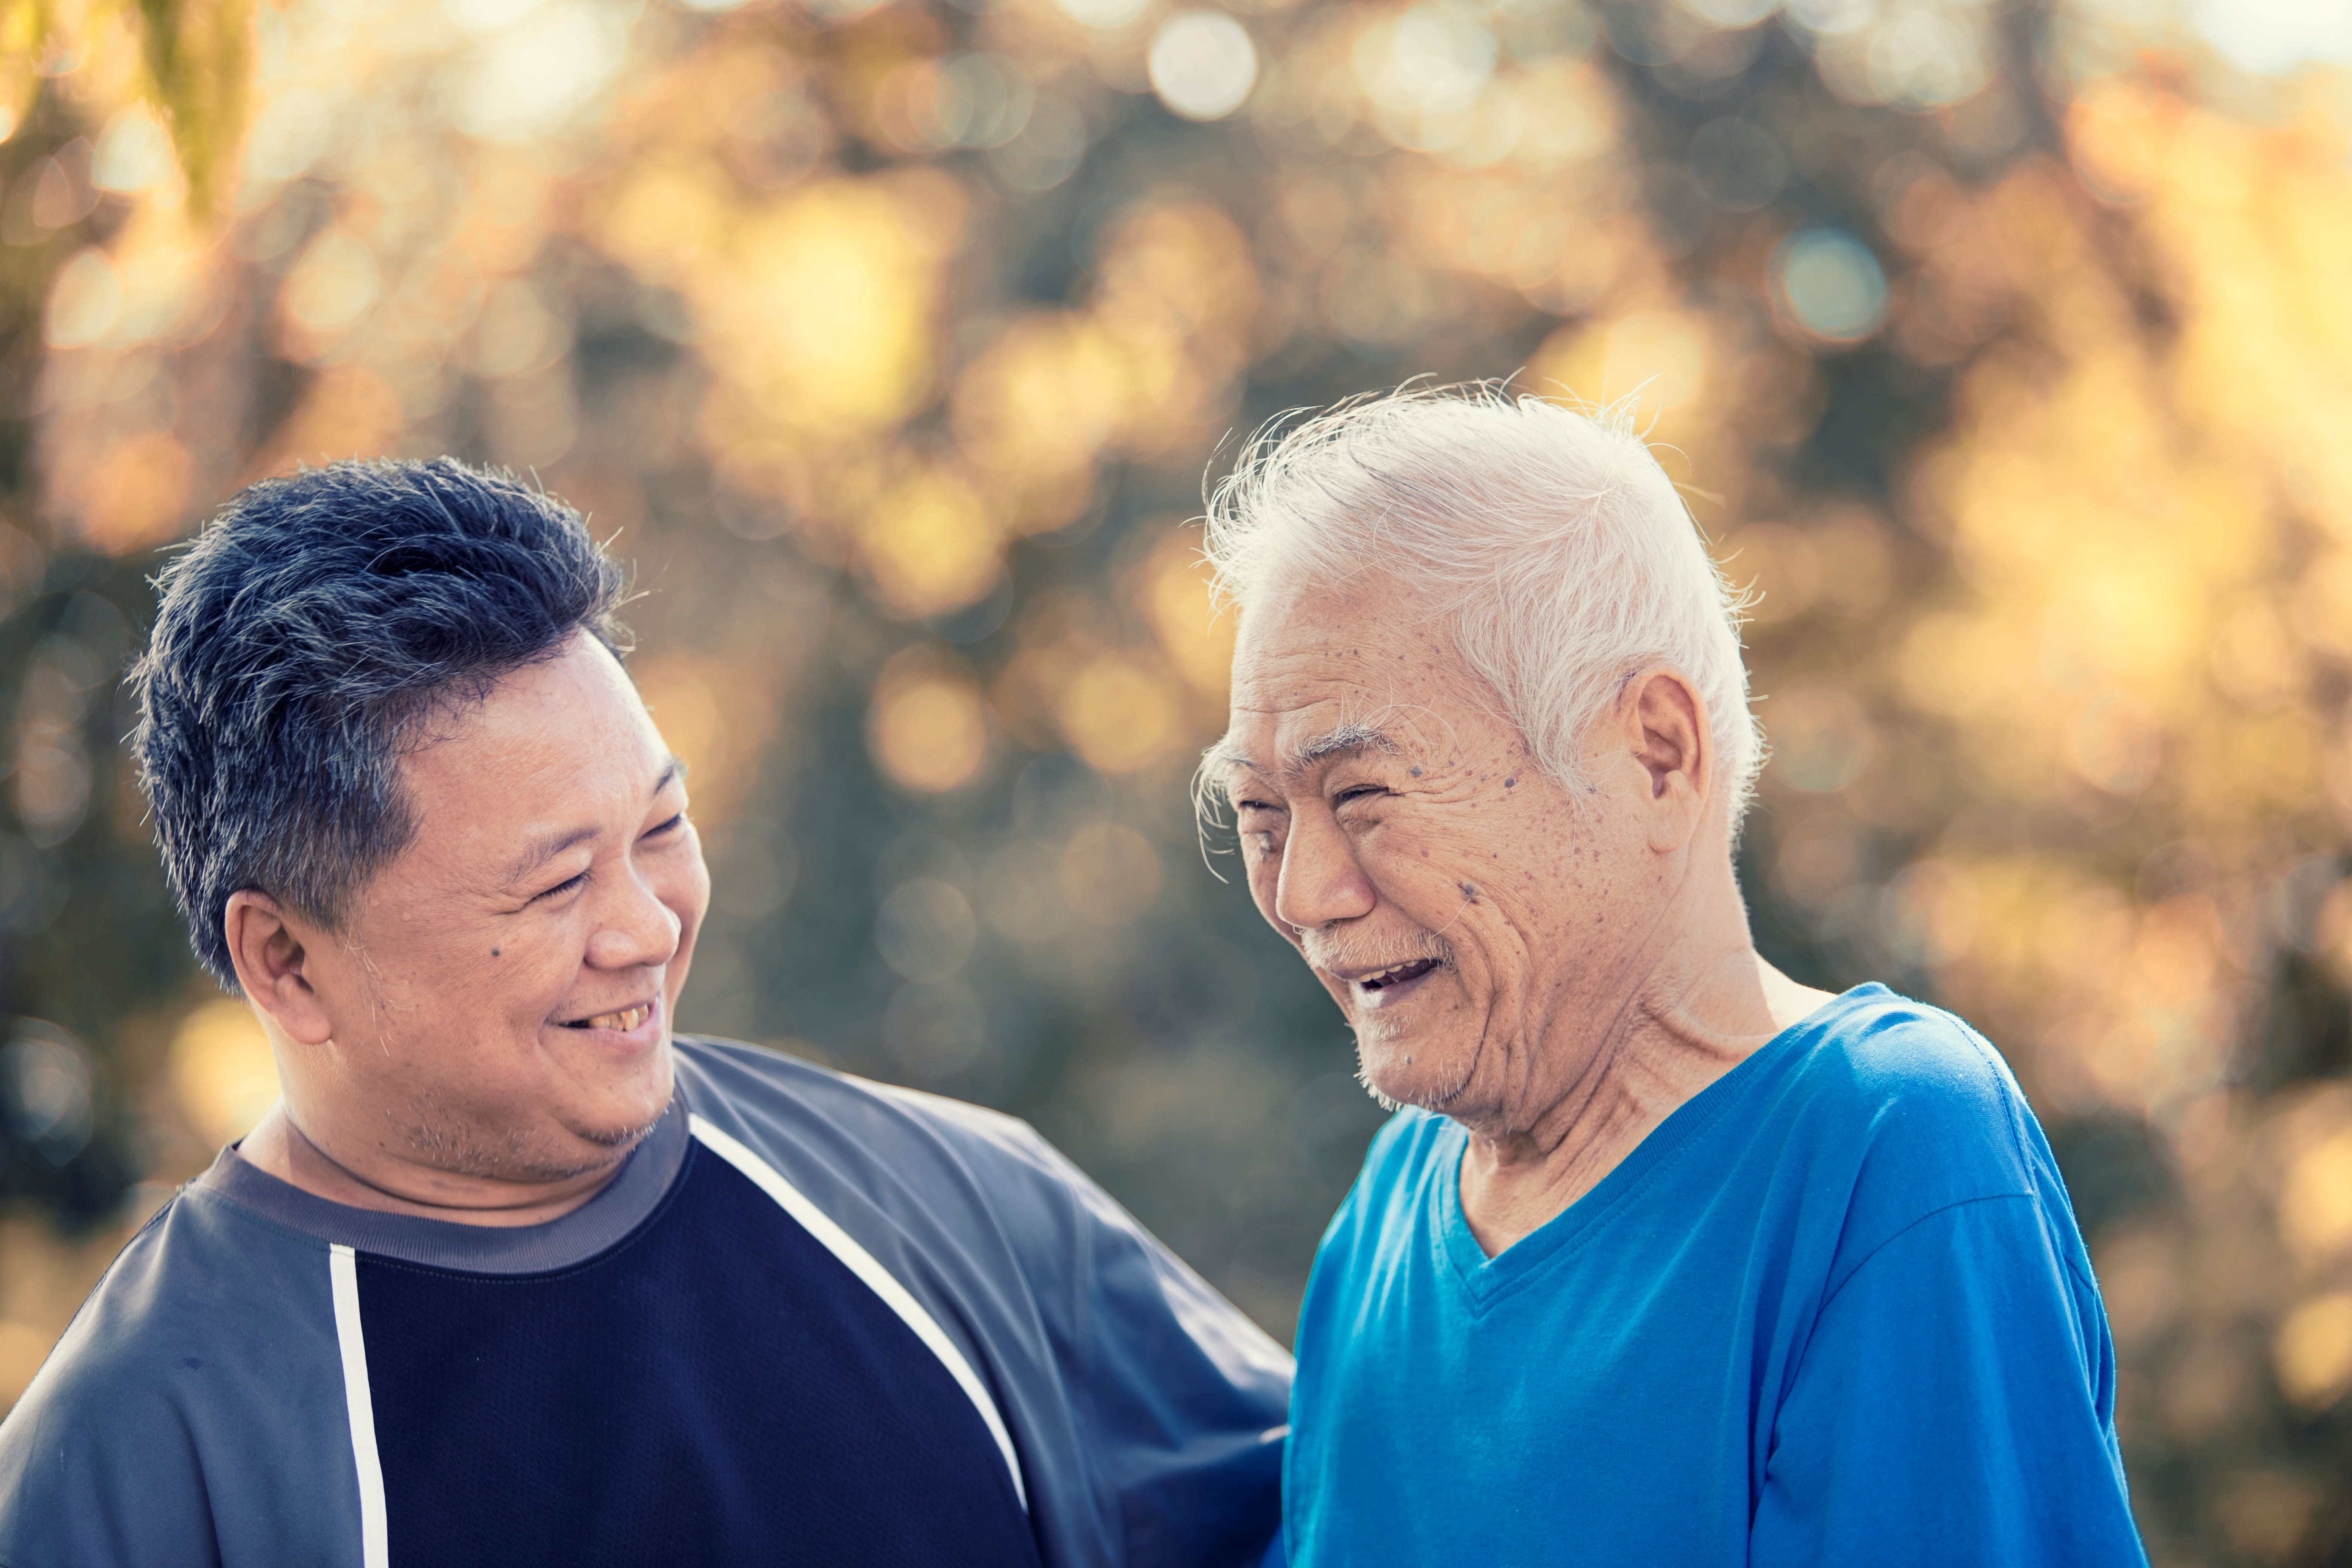 Recent policy doesn't just support older adults with dementia; it aims to improve the situations of family and friend caregivers as well.